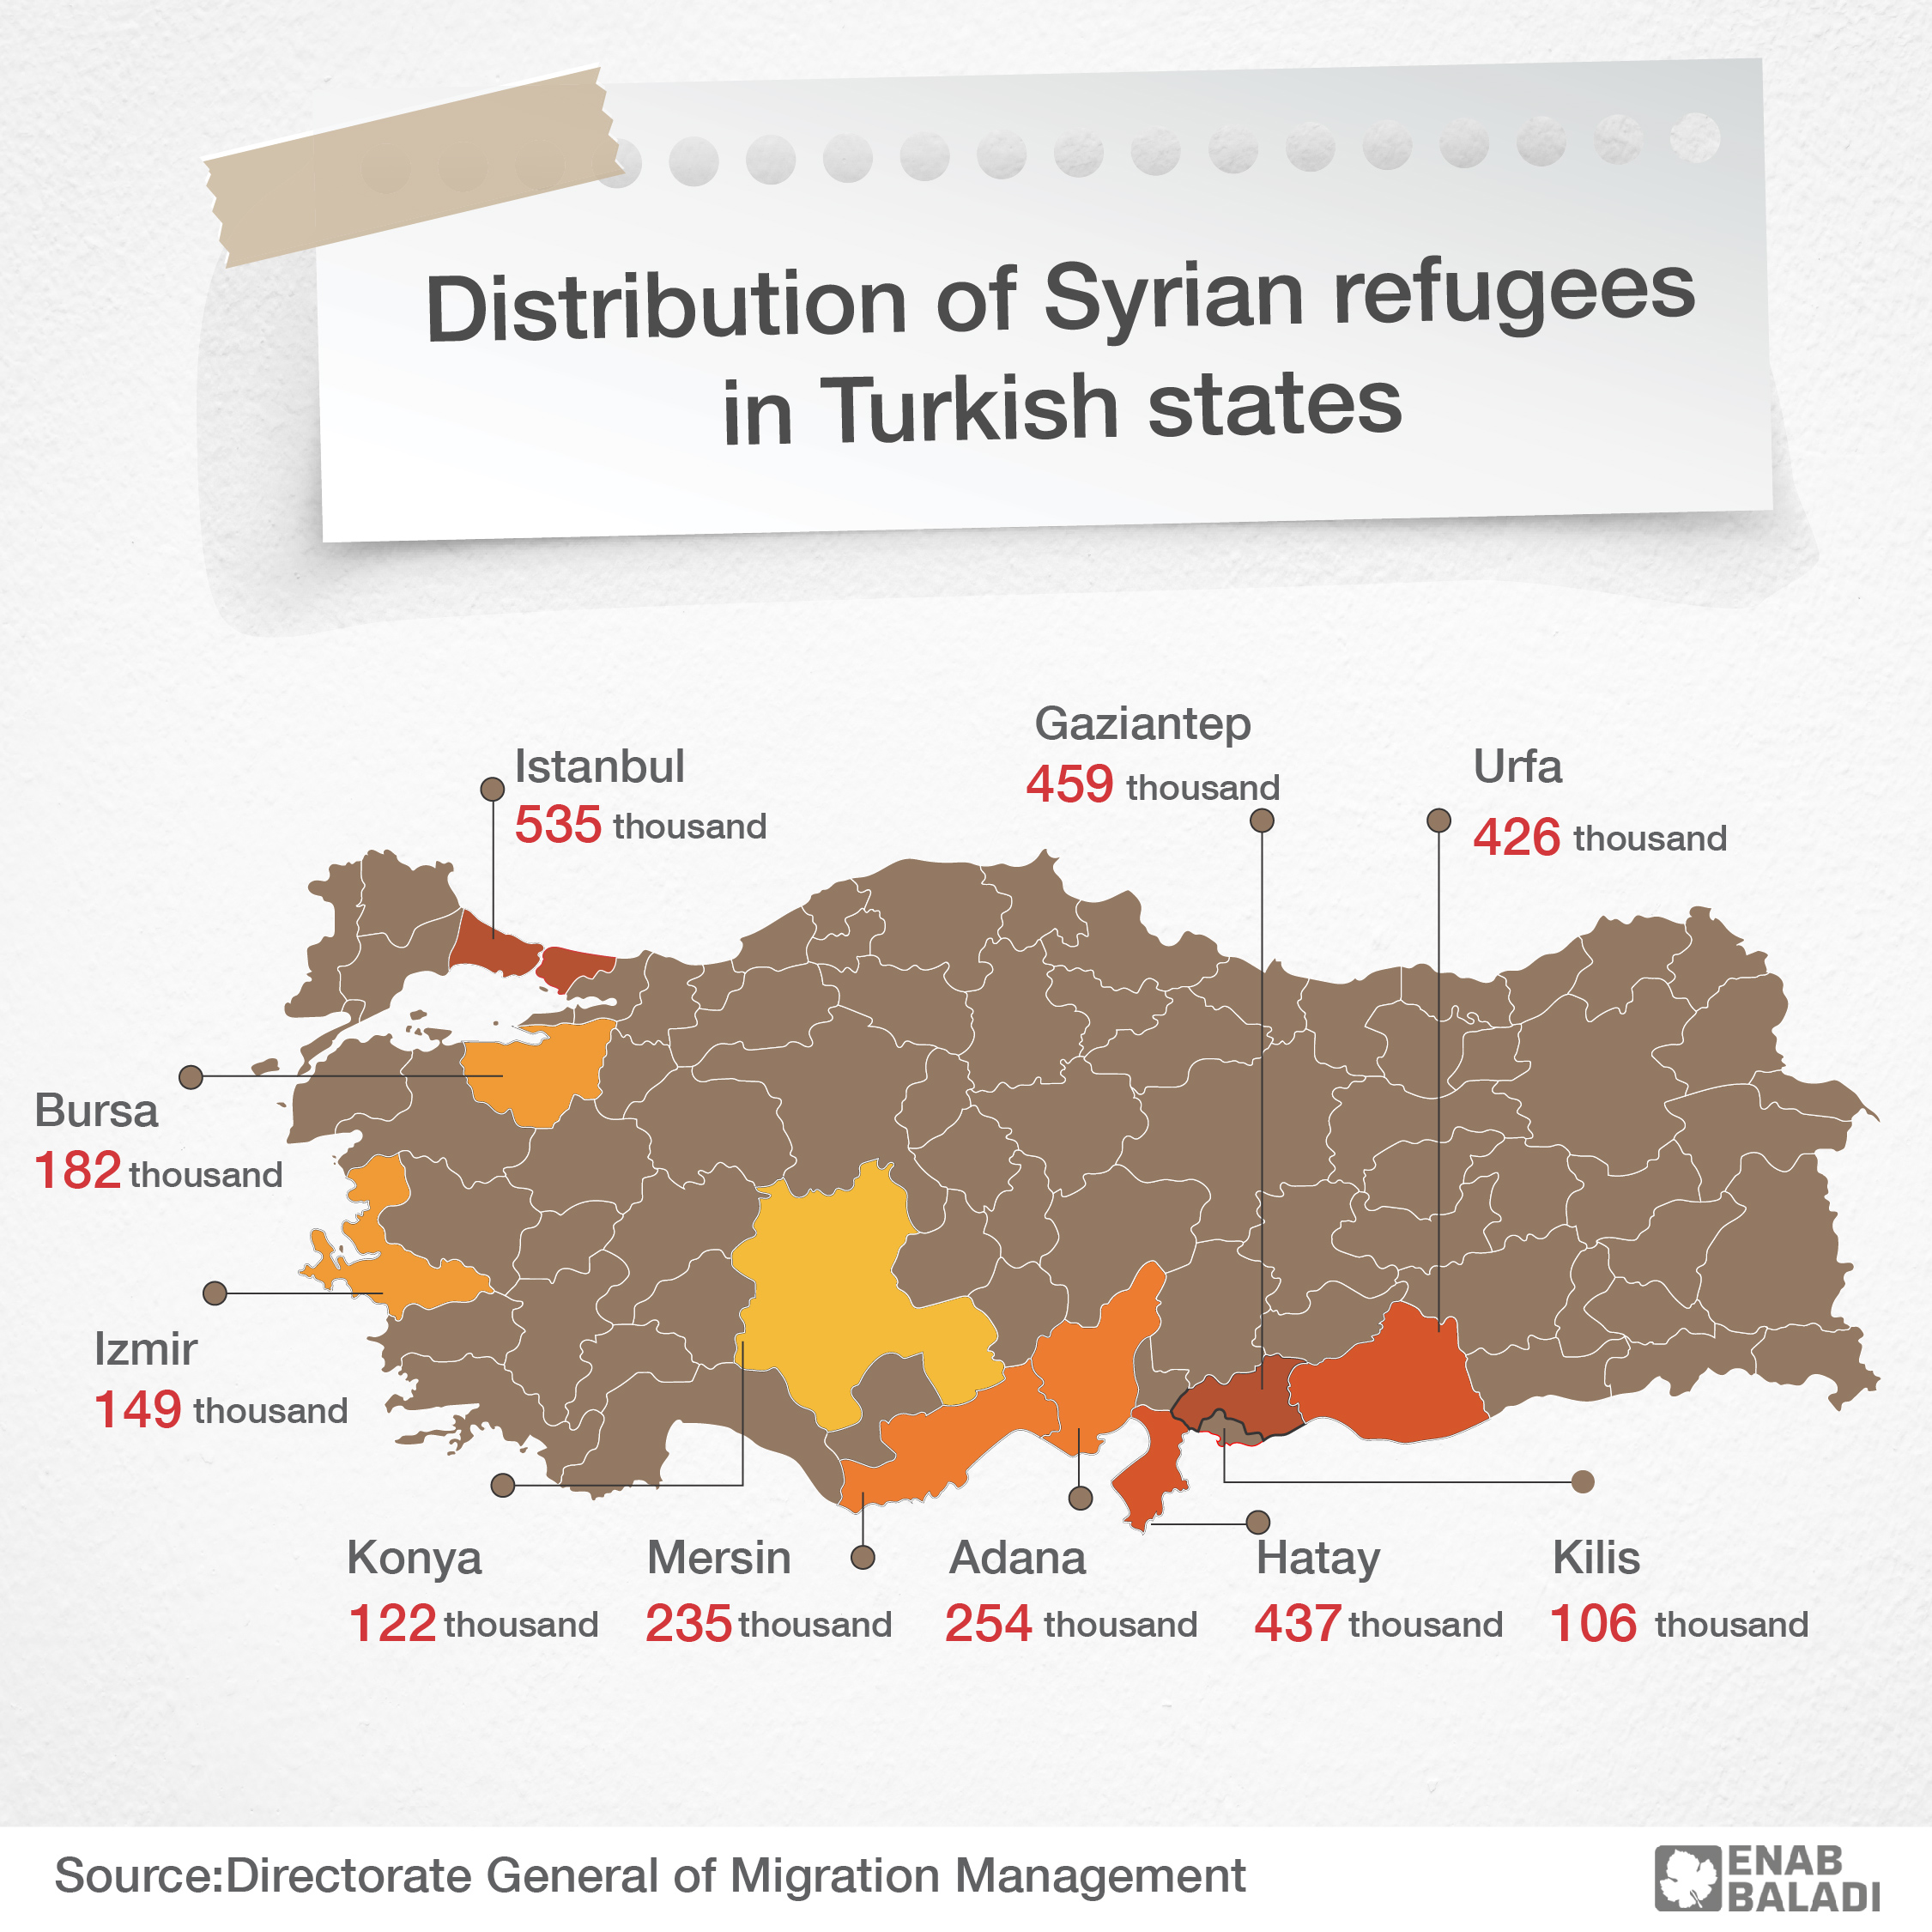 Who bridges the gap between the Turks and Syrian refugees?